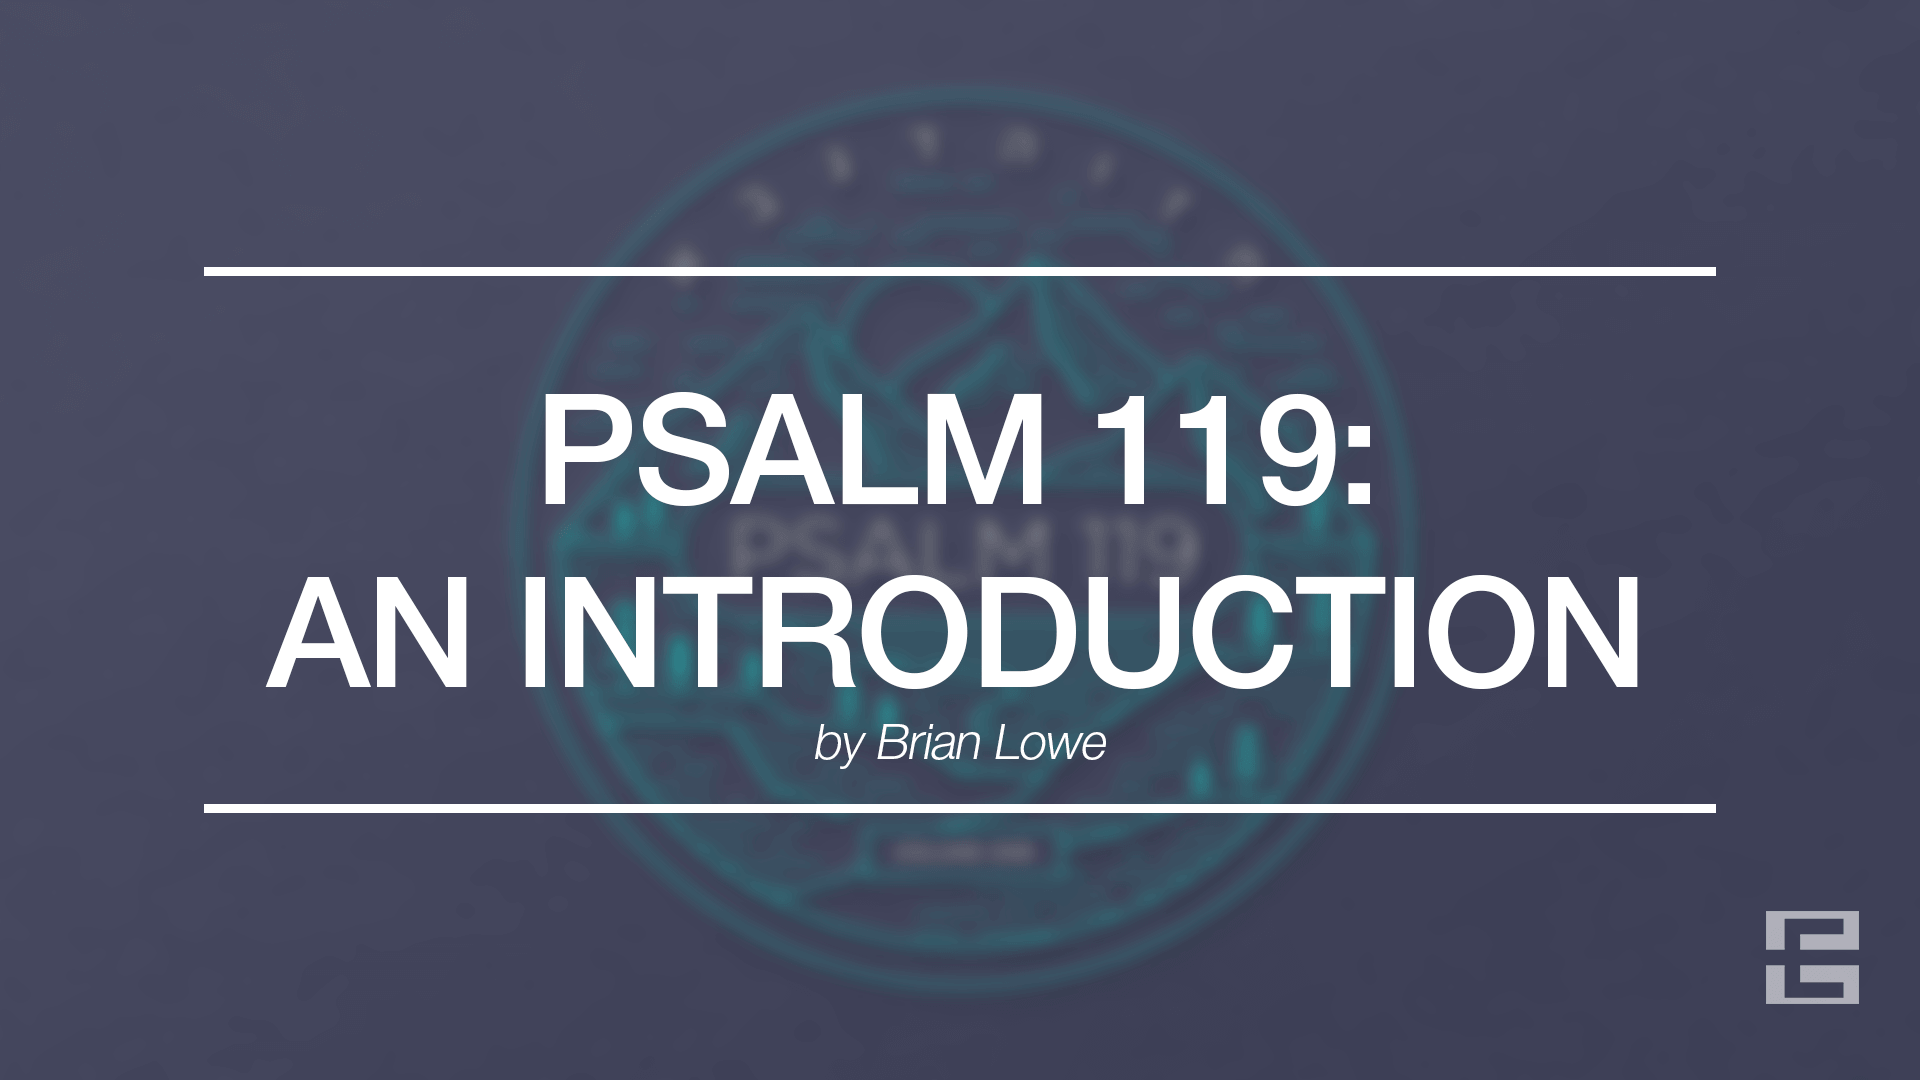 Psalm 119: An Introduction